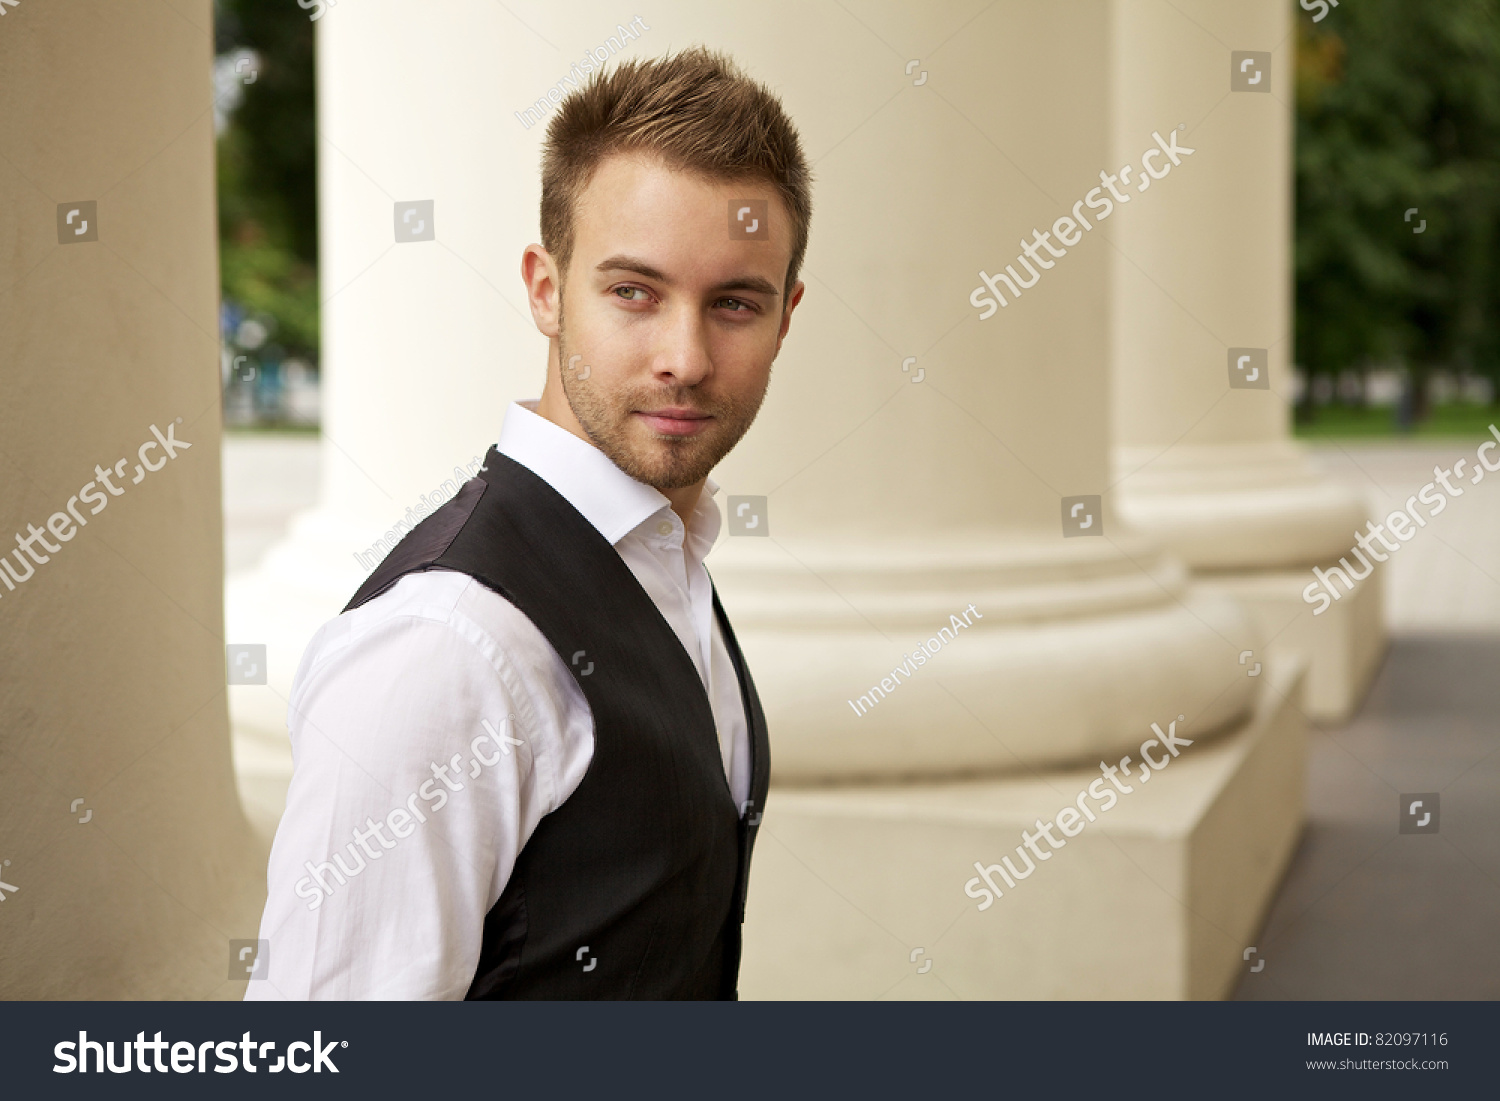 Portrait of a cheerful young businessman #82097116